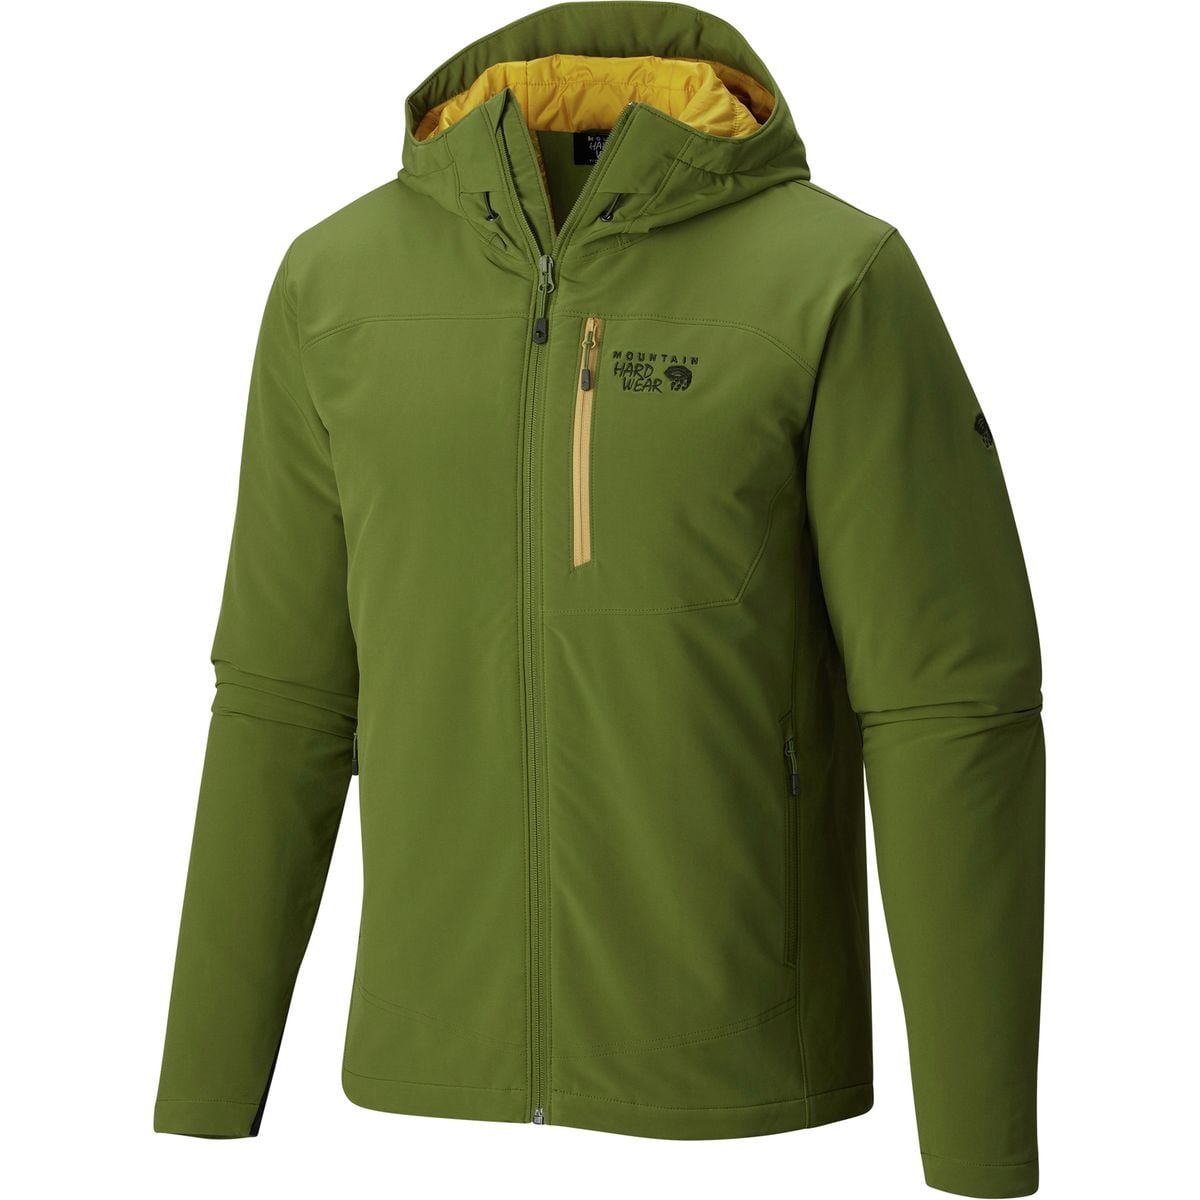 Mens Clothing - Synthetic Insulation Jackets